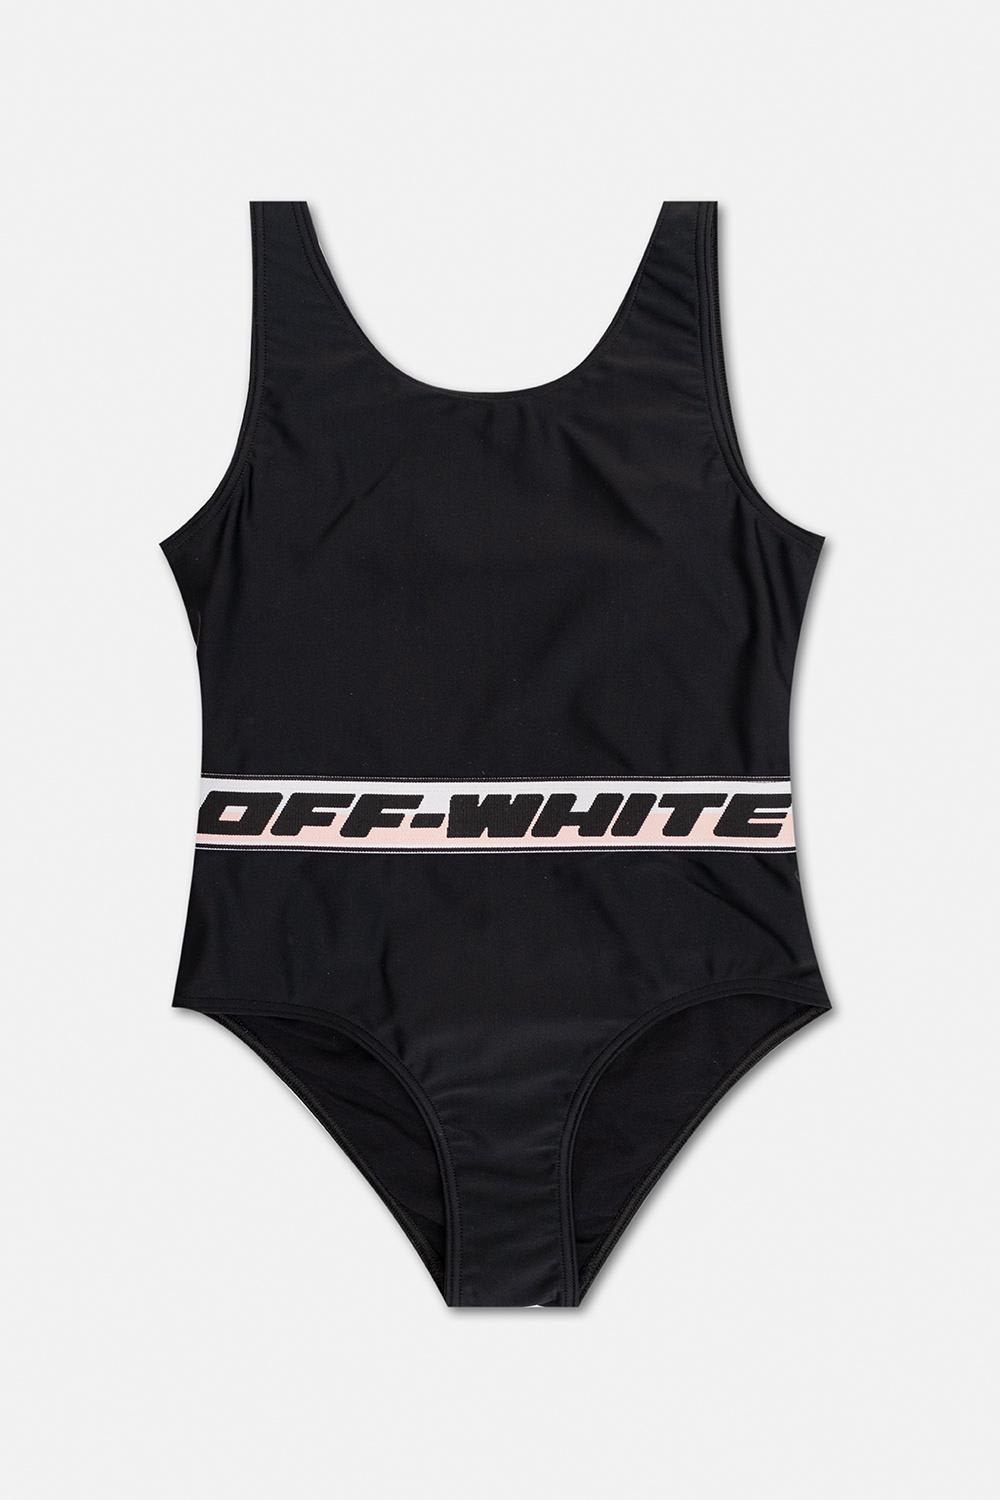 Off-white Kids' One-piece Swimsuit In Black Black